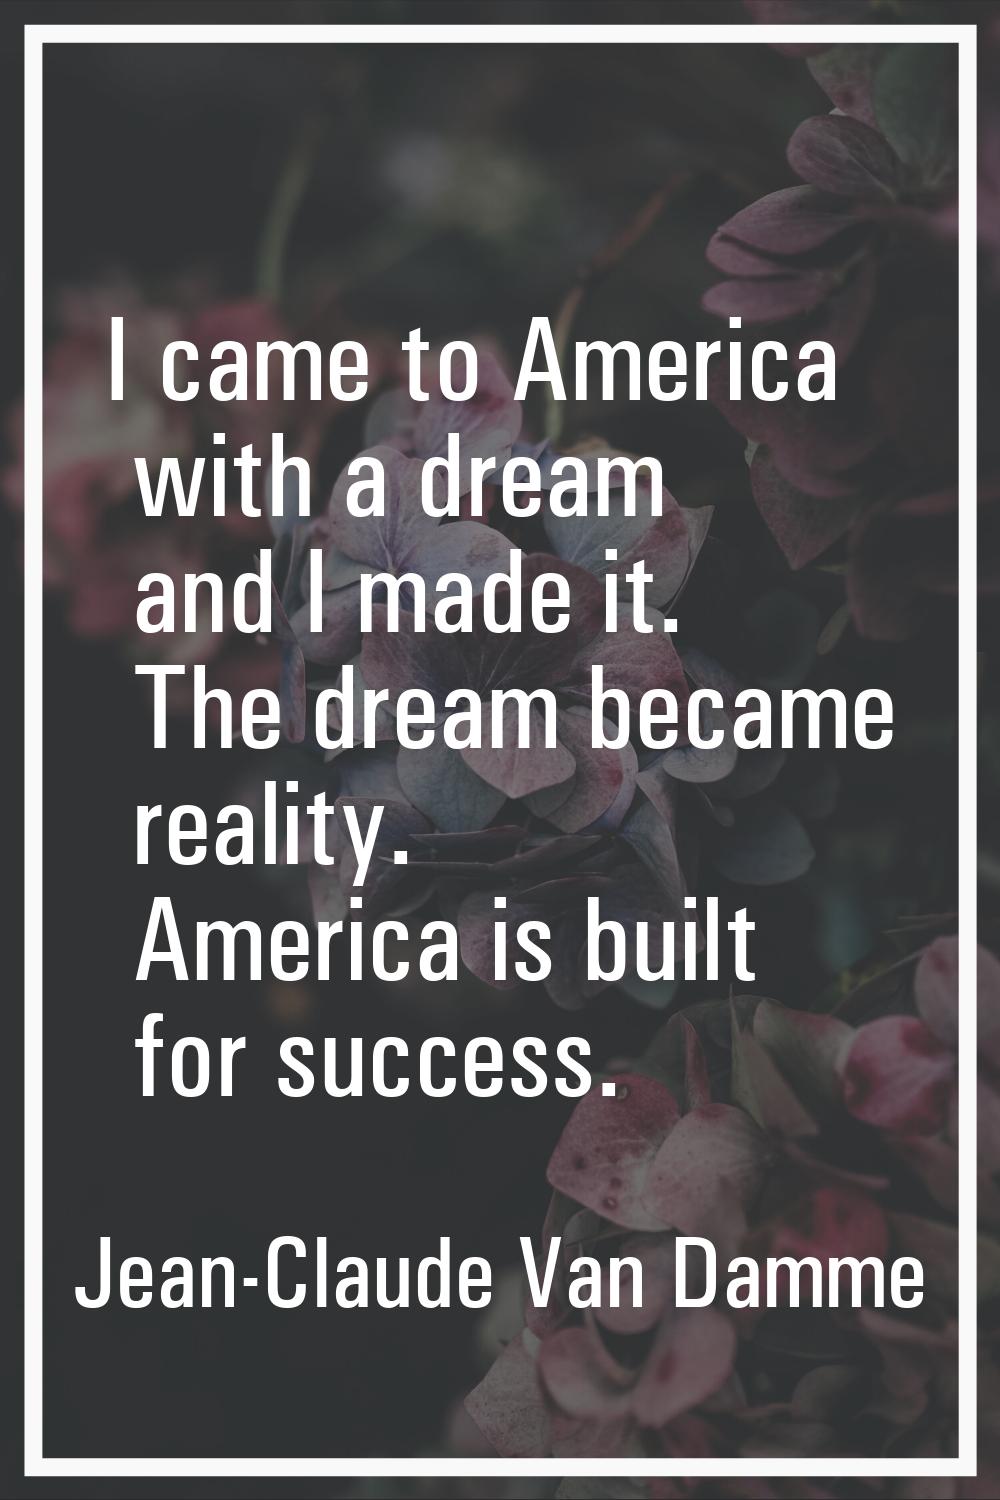 I came to America with a dream and I made it. The dream became reality. America is built for succes